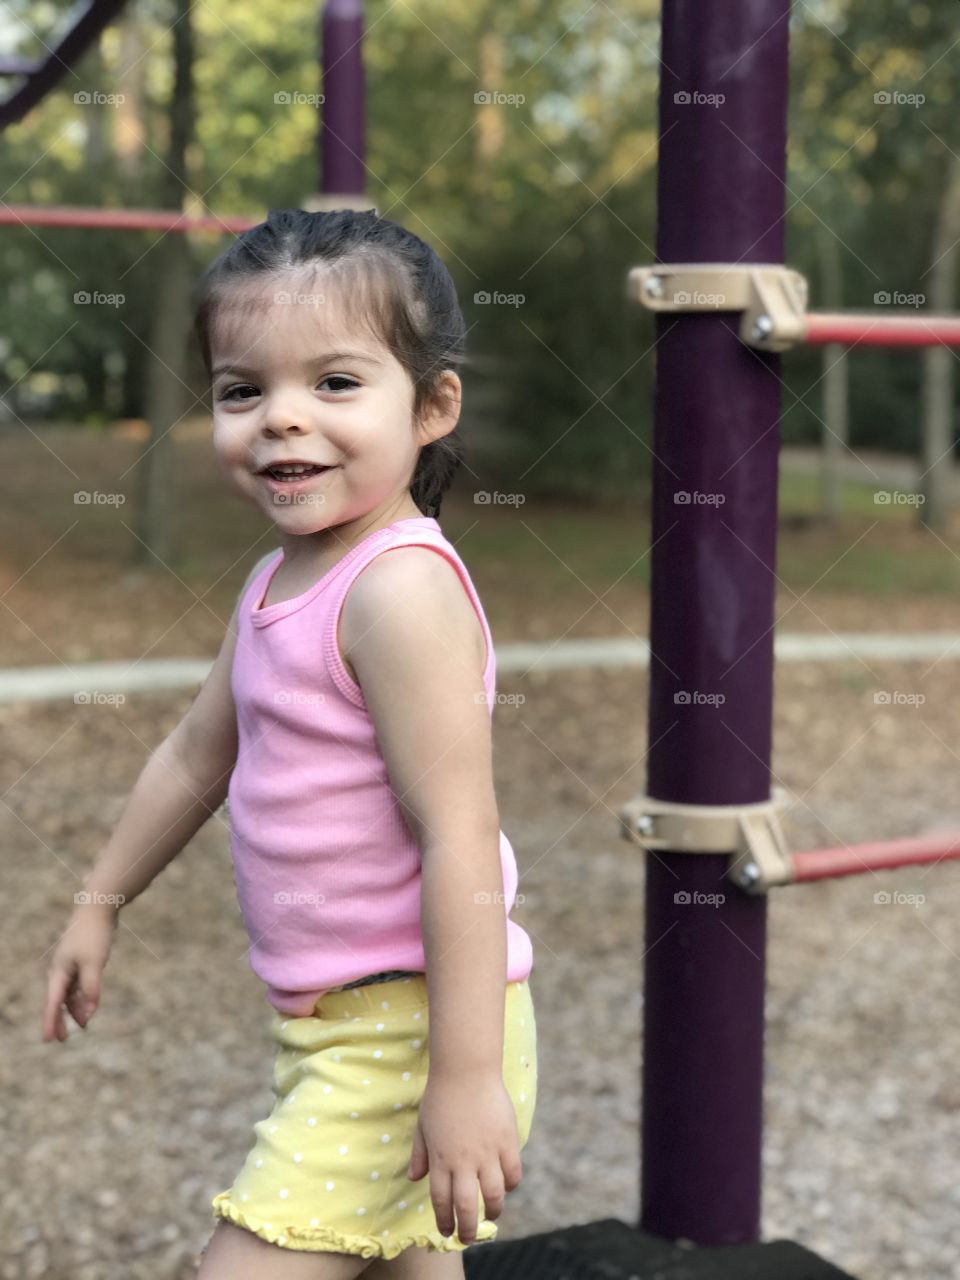 My beautiful daughter playing on the neighborhood playground. Just a smiling and enjoying every minute of it. 